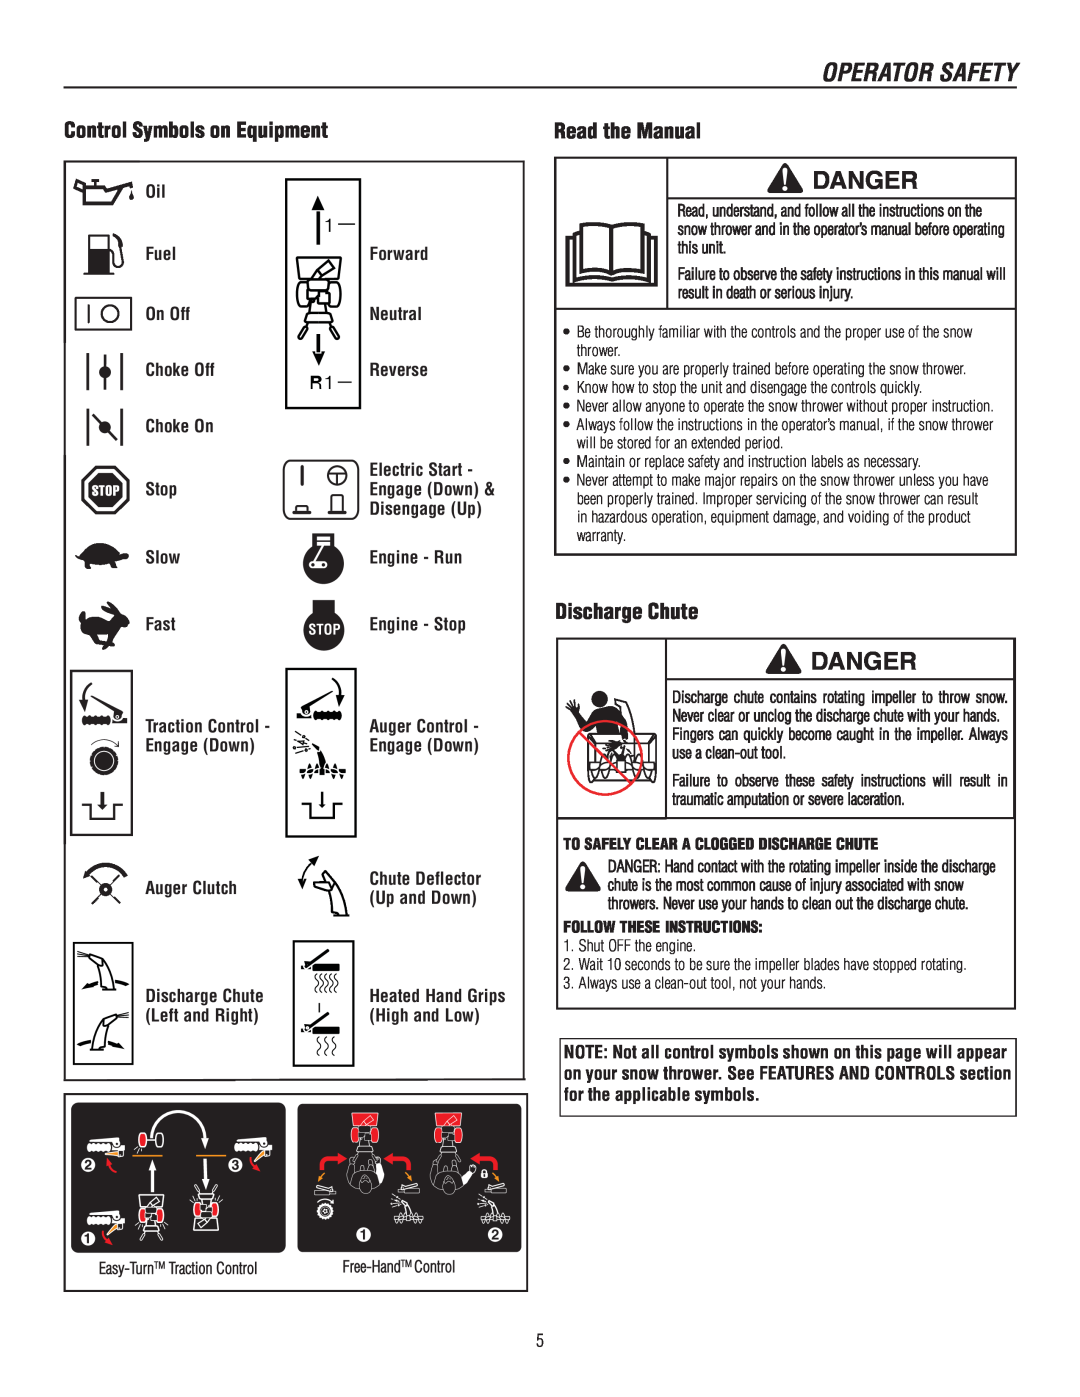 Murray 1737920, 1695722 manual Control Symbols on Equipment, Read the Manual, Discharge Chute, Operator Safety, Danger 